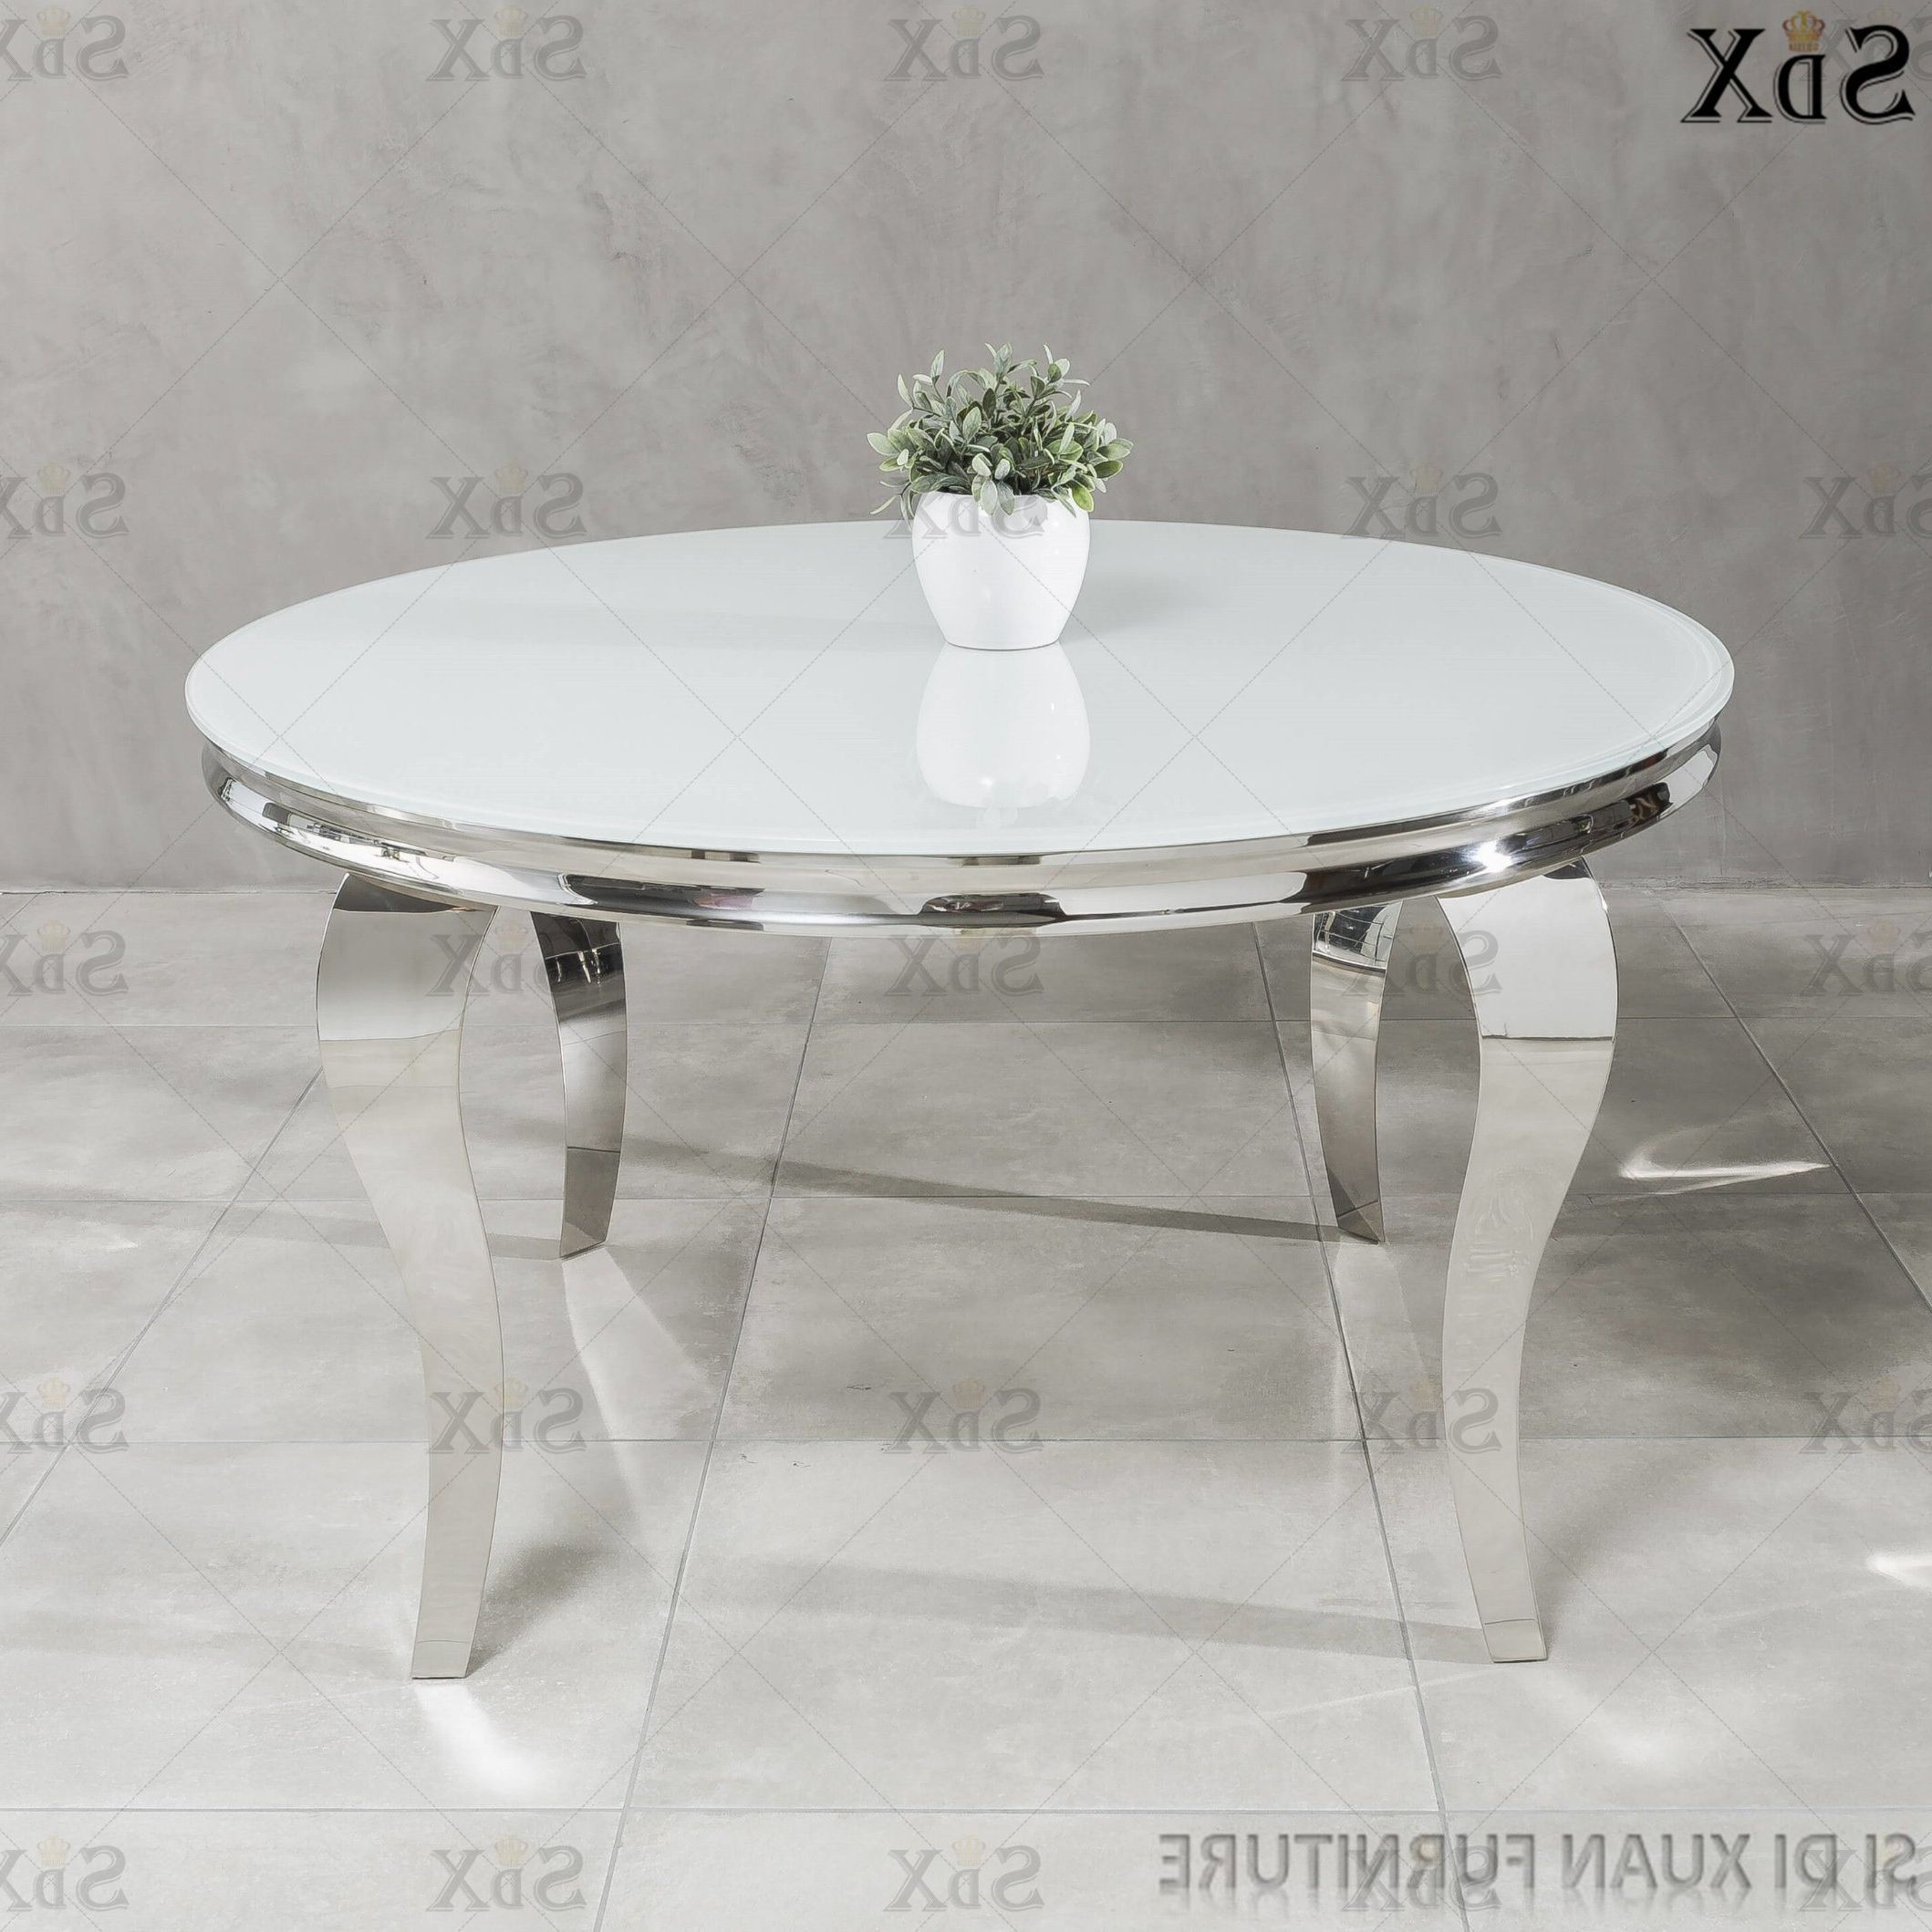 [%[hot Item] Modern Round Table Dining Room Furniture Set Glass Top Stainless  Steel Furniture Dining Table Pertaining To Preferred Modern Round Glass Top Dining Tables|modern Round Glass Top Dining Tables Pertaining To Newest [hot Item] Modern Round Table Dining Room Furniture Set Glass Top Stainless  Steel Furniture Dining Table|most Recently Released Modern Round Glass Top Dining Tables Within [hot Item] Modern Round Table Dining Room Furniture Set Glass Top Stainless  Steel Furniture Dining Table|popular [hot Item] Modern Round Table Dining Room Furniture Set Glass Top Stainless  Steel Furniture Dining Table Throughout Modern Round Glass Top Dining Tables%] (View 18 of 25)